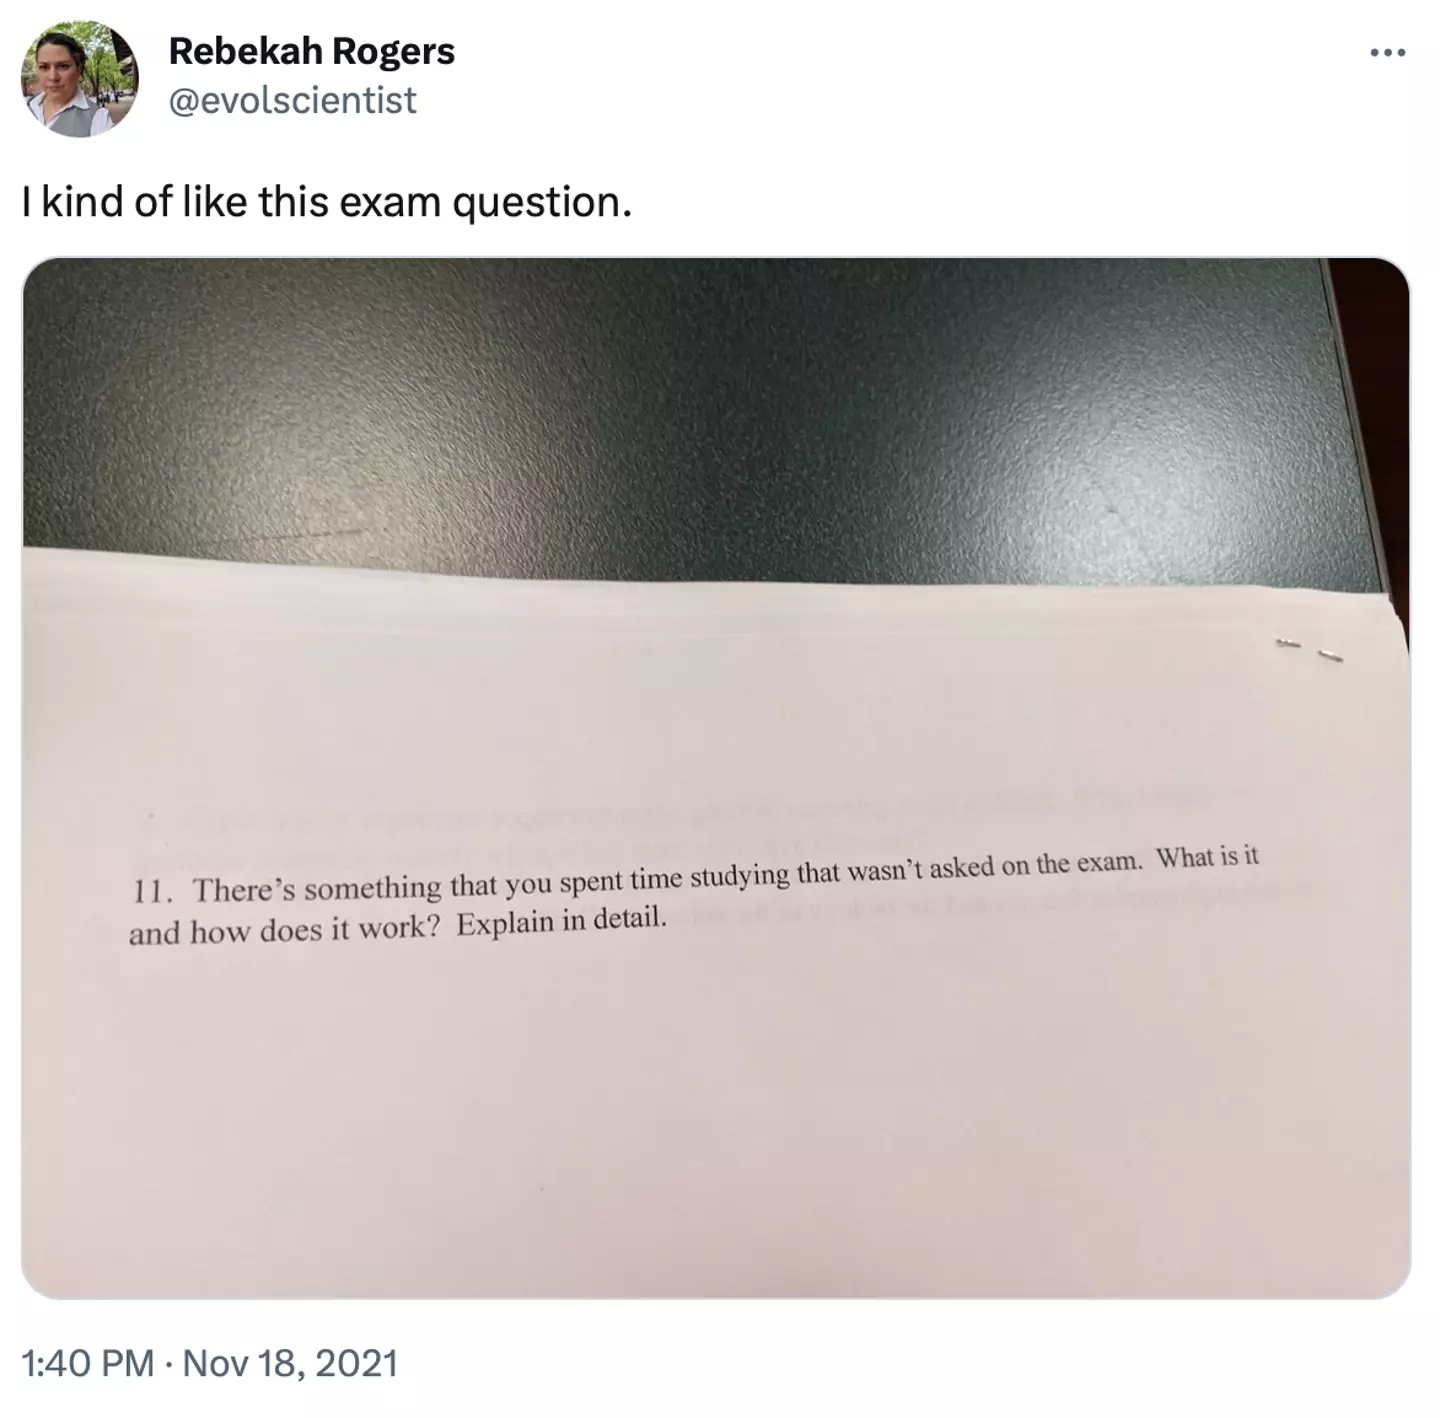 This exam question went viral for all the wrong reasons.